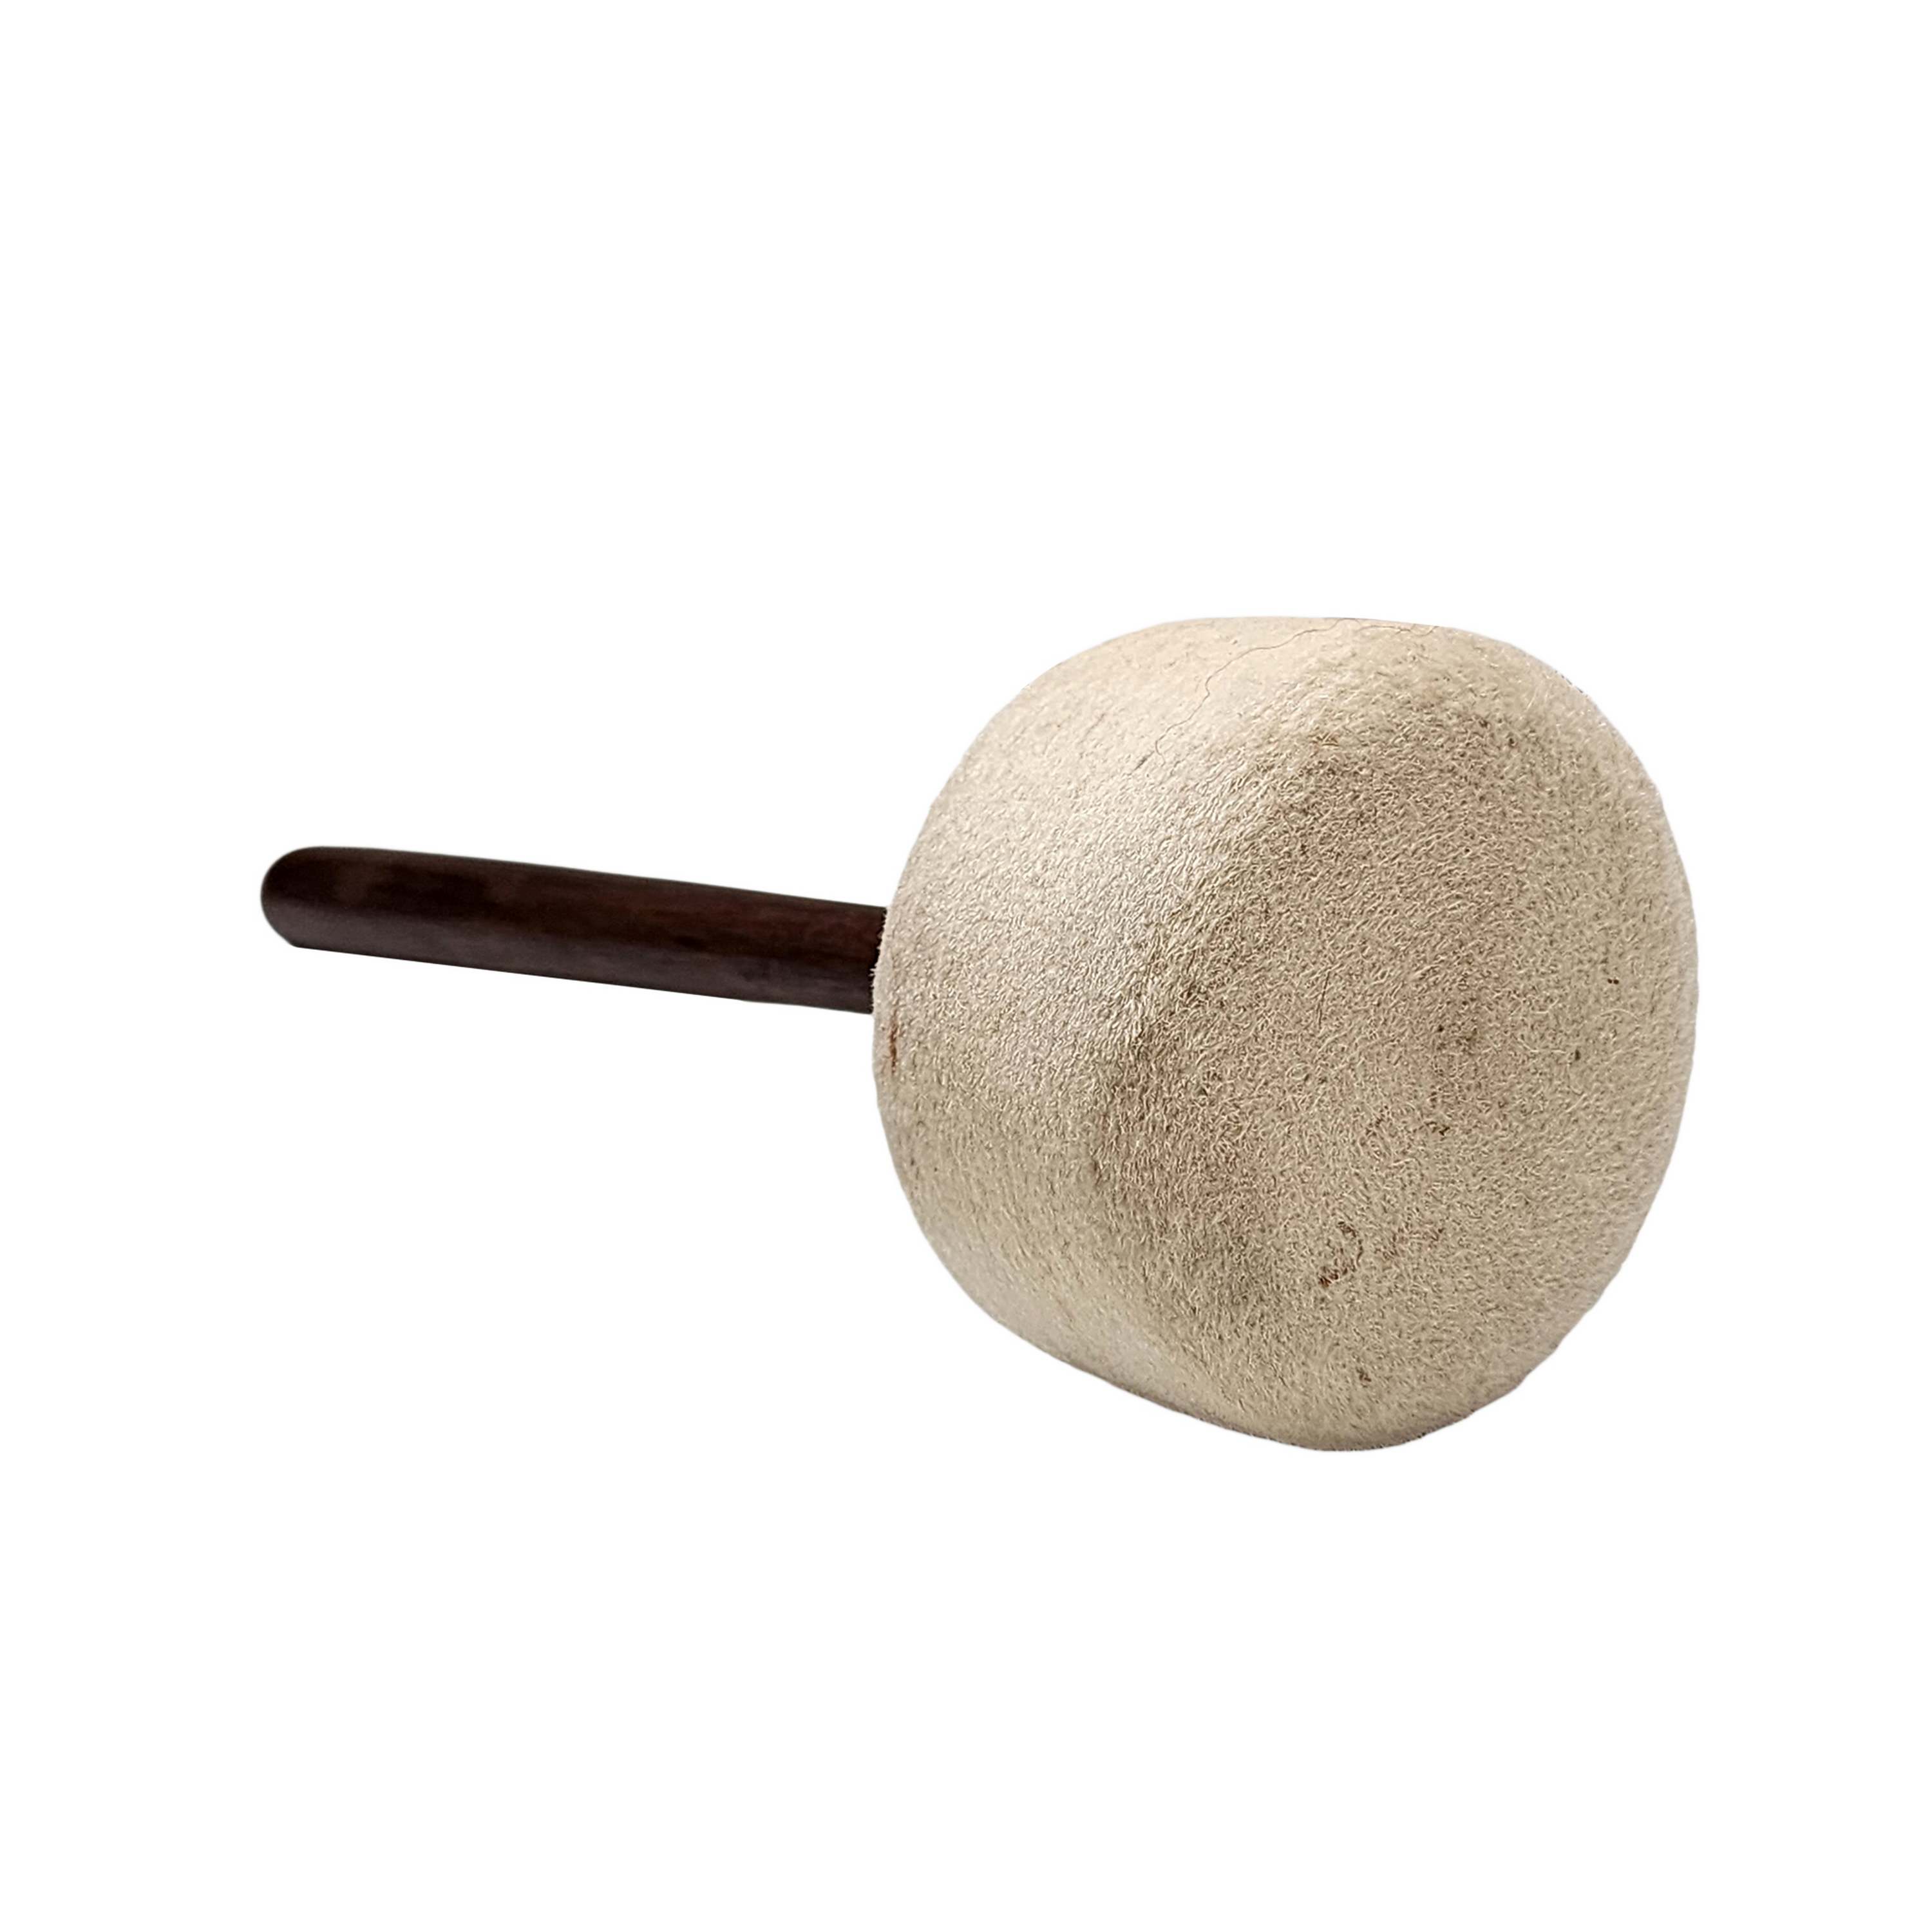 Singing Bowl Accessories, Soft Felt Beating Mallet, Normal White